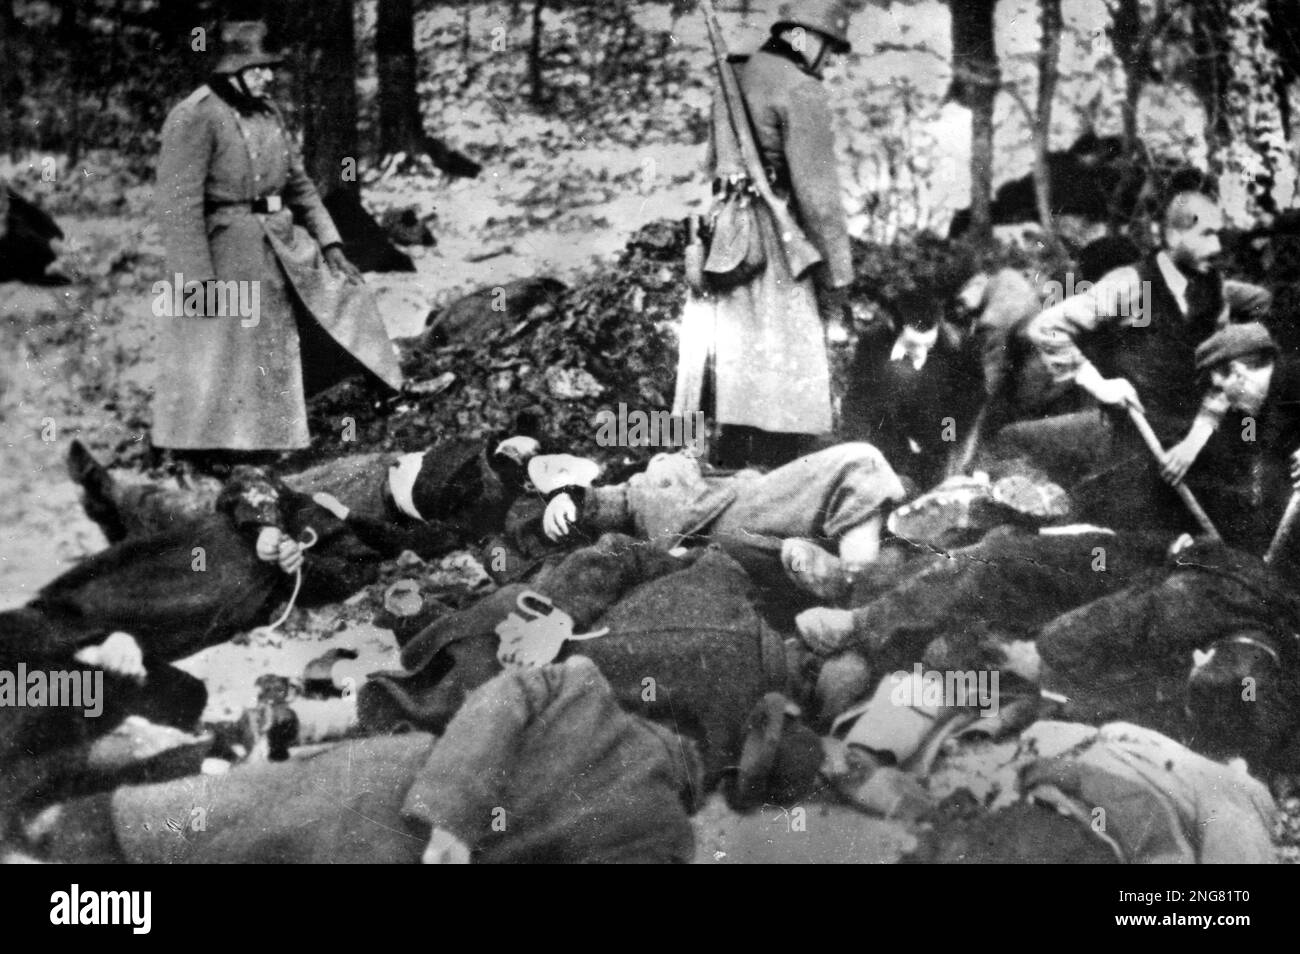 The early phase of the Holocaust was not with gas chambers but mobile execution squads known as Enisatzgruppen. Their task was to roam behind teh front lines shooting all the Jews they could. They killed an estimated  two million people.  This photo shows Germansoldiers overseeing the burial of bodies after an execution. Stock Photo